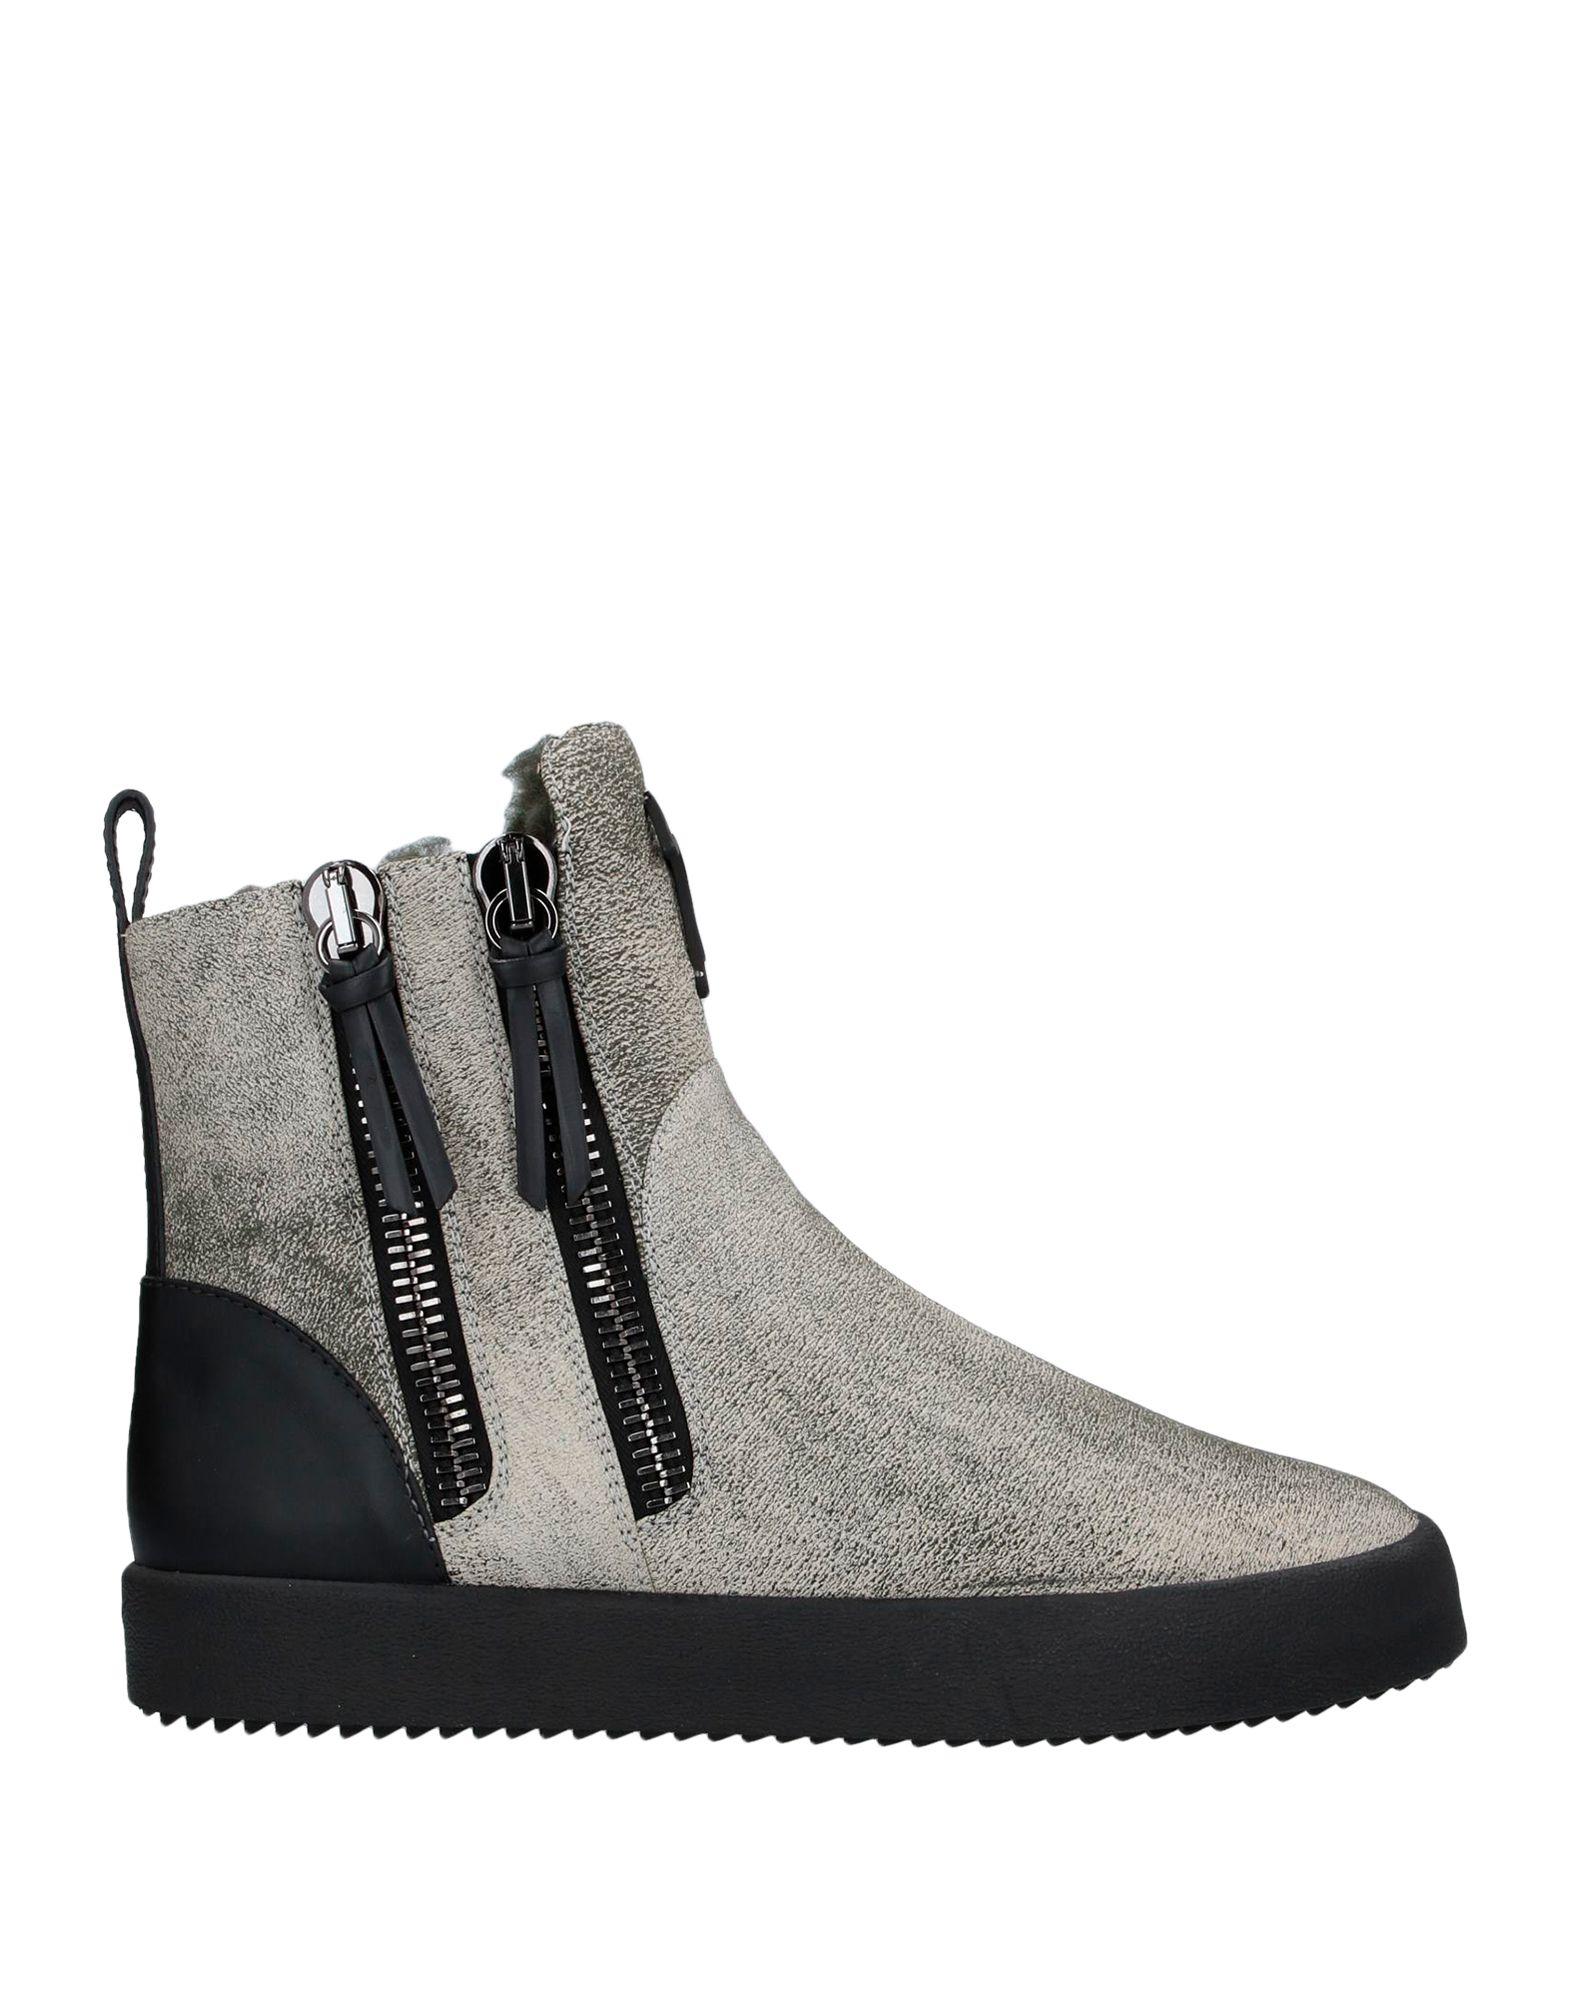 Giuseppe Zanotti Leather Ankle Boots in Light Grey (Gray) for Men - Lyst